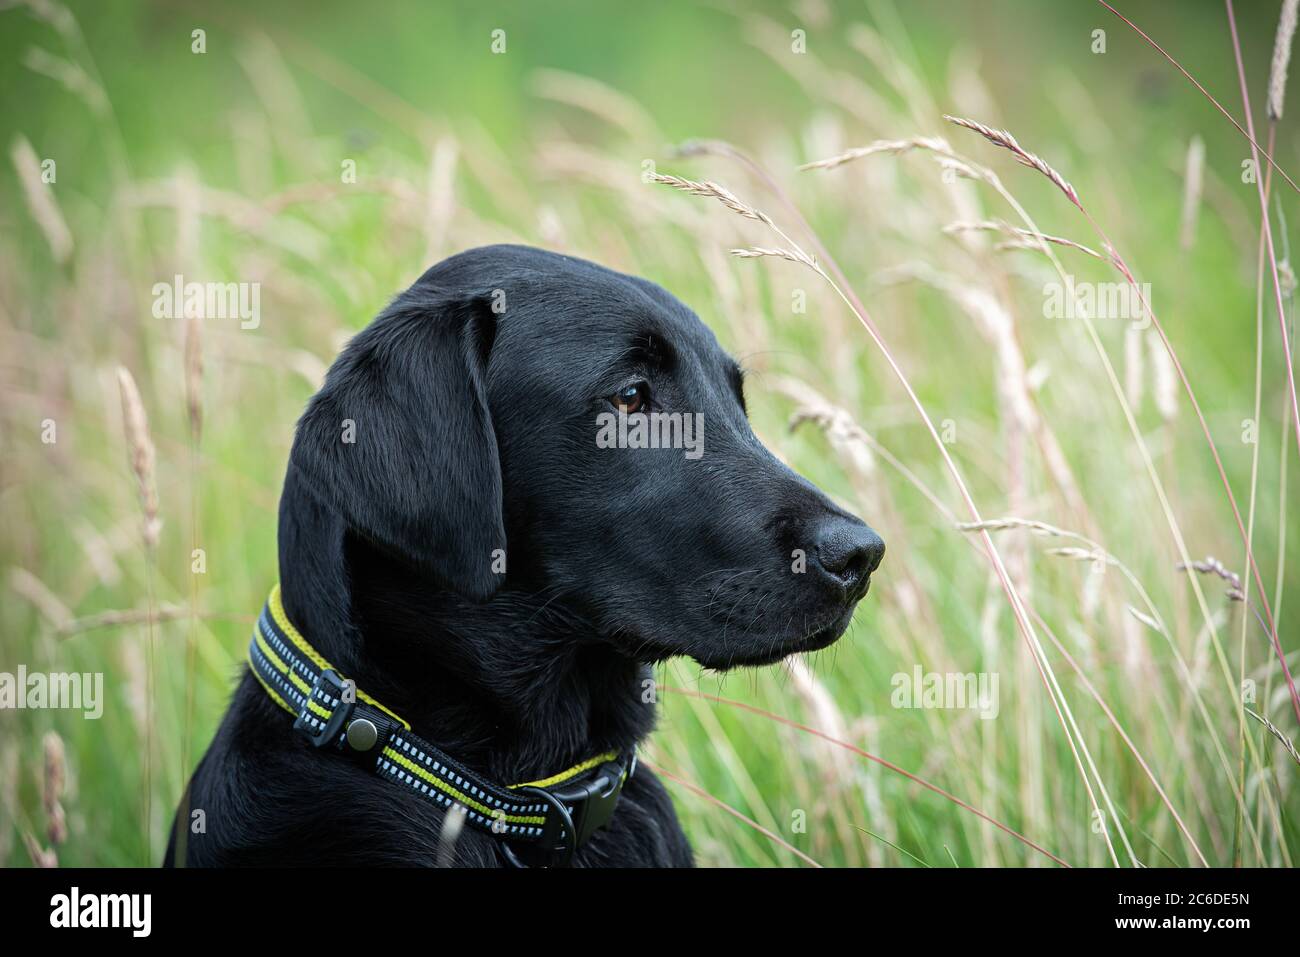 Black Labrador retriever puppy sitting attentively in a field of long grass Stock Photo